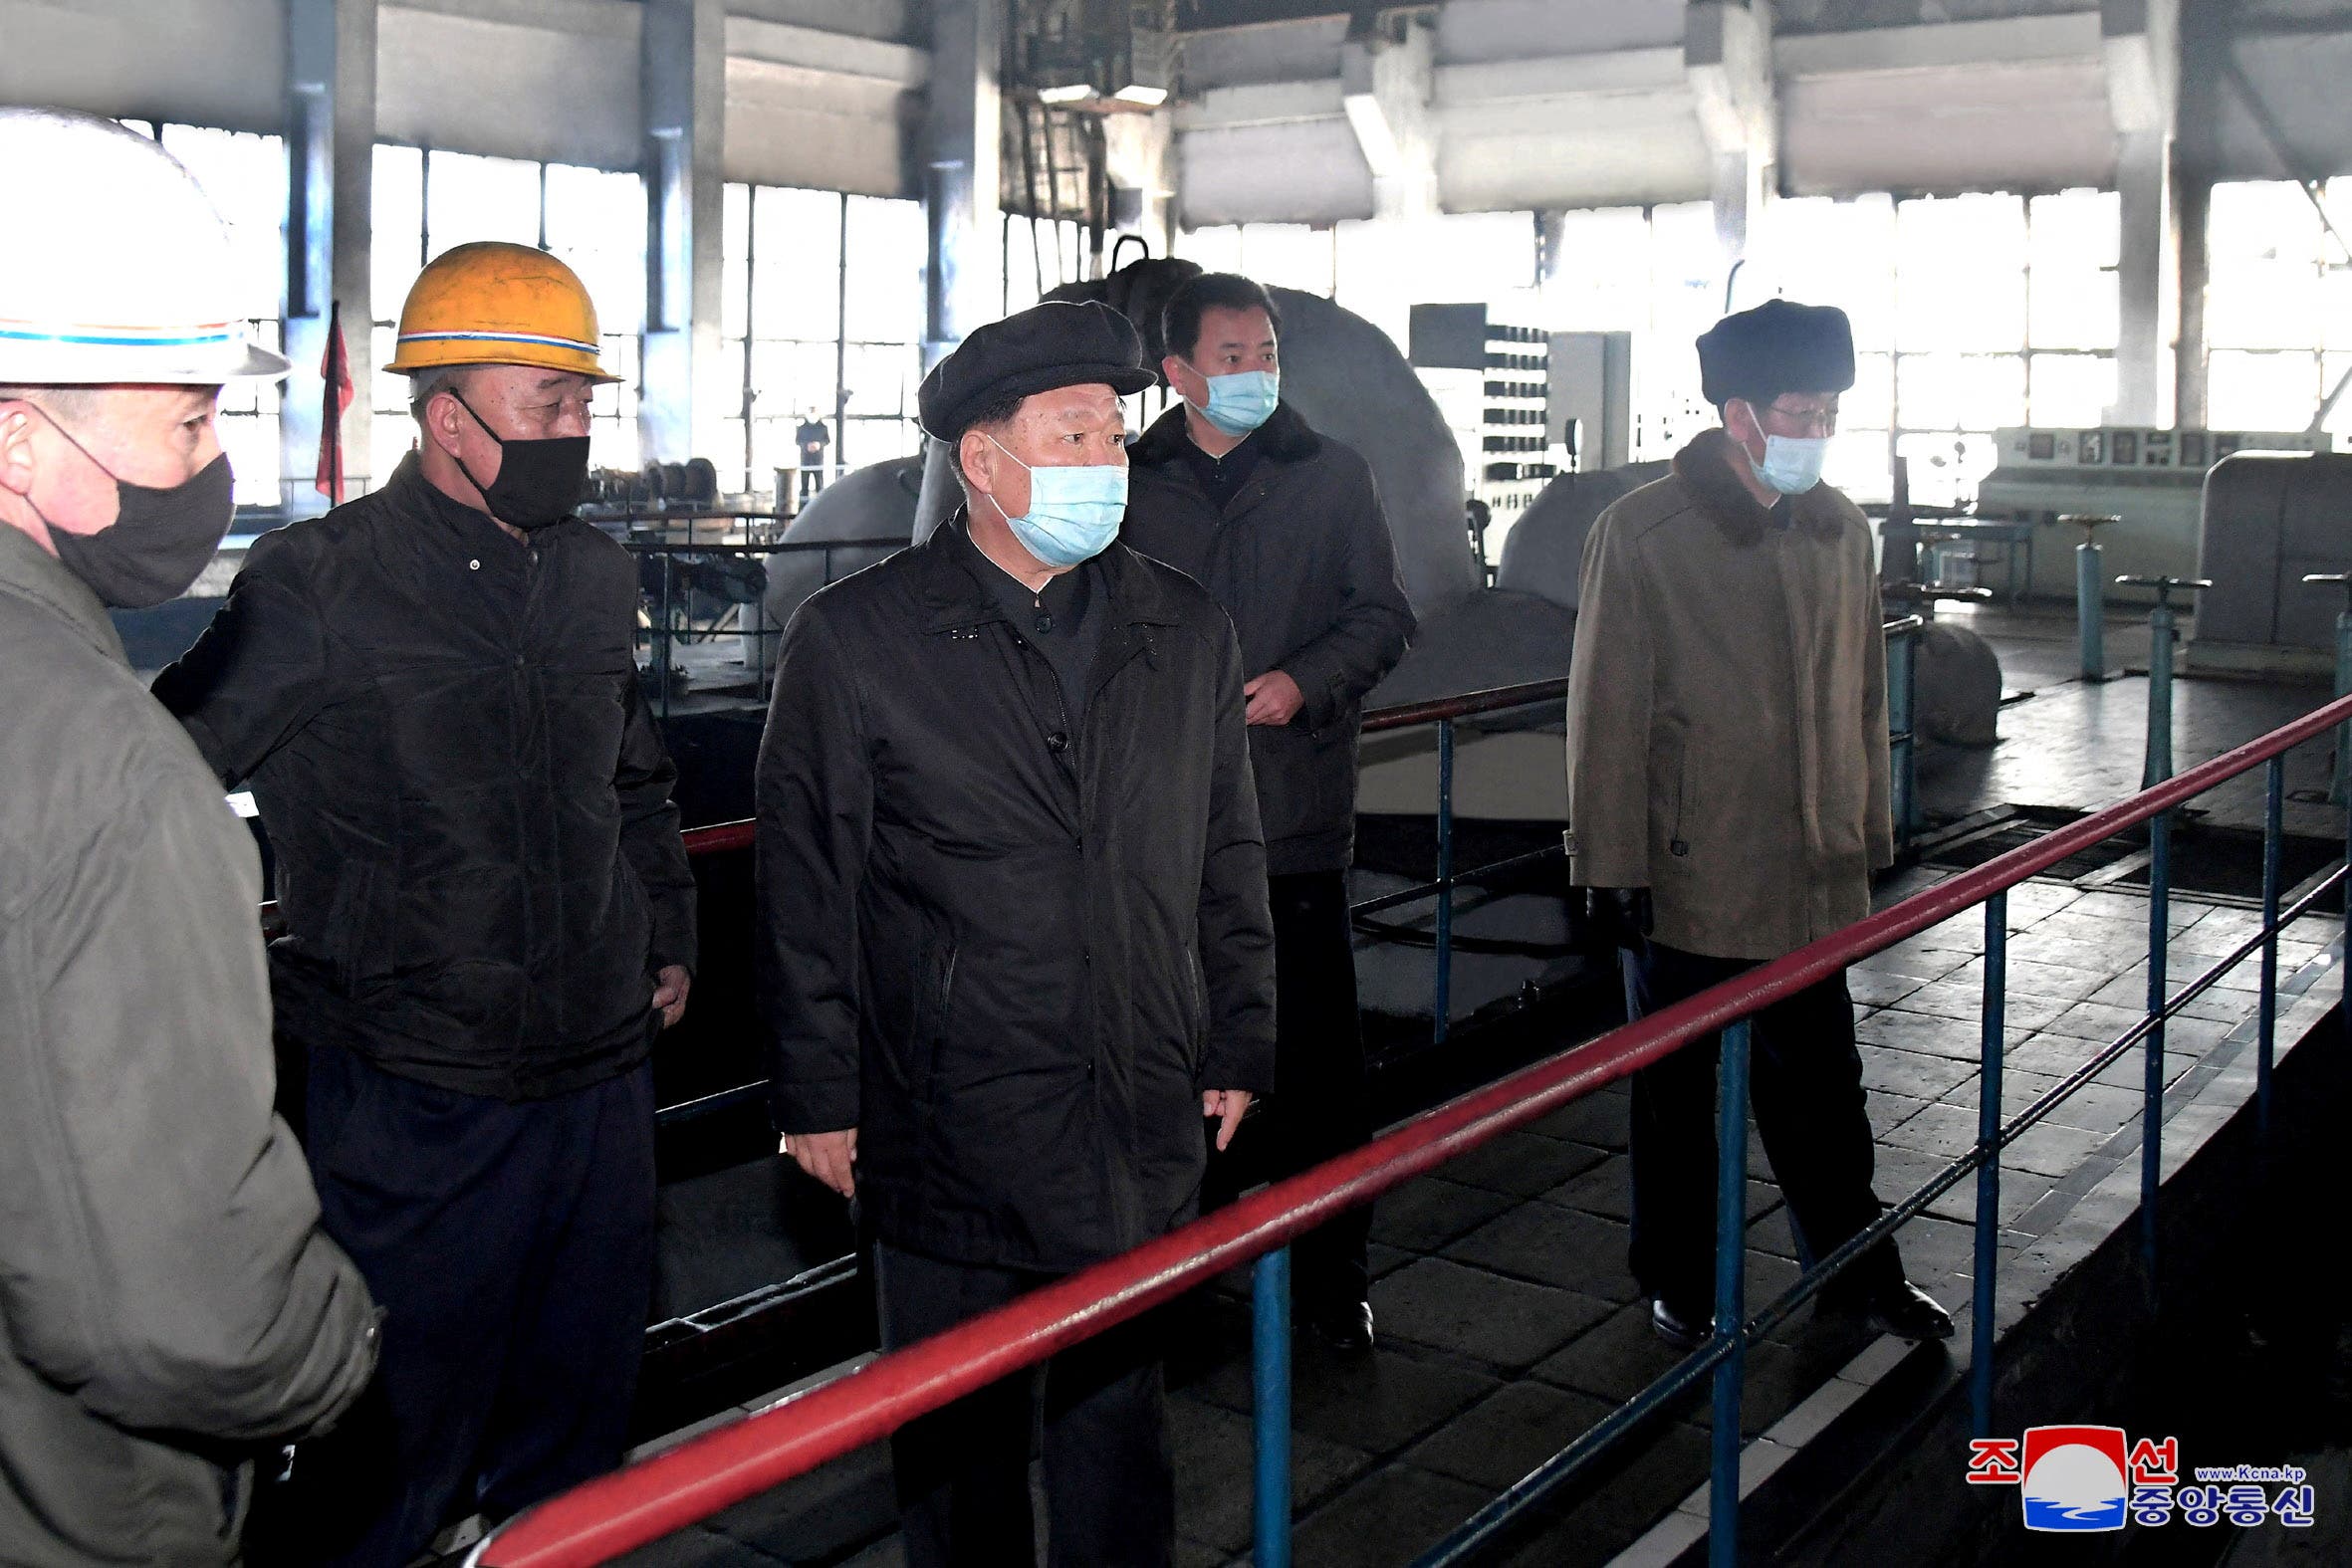 North Korean leader Kim Jong Un on Tuesday during his visit to a power plant in Pyongyang